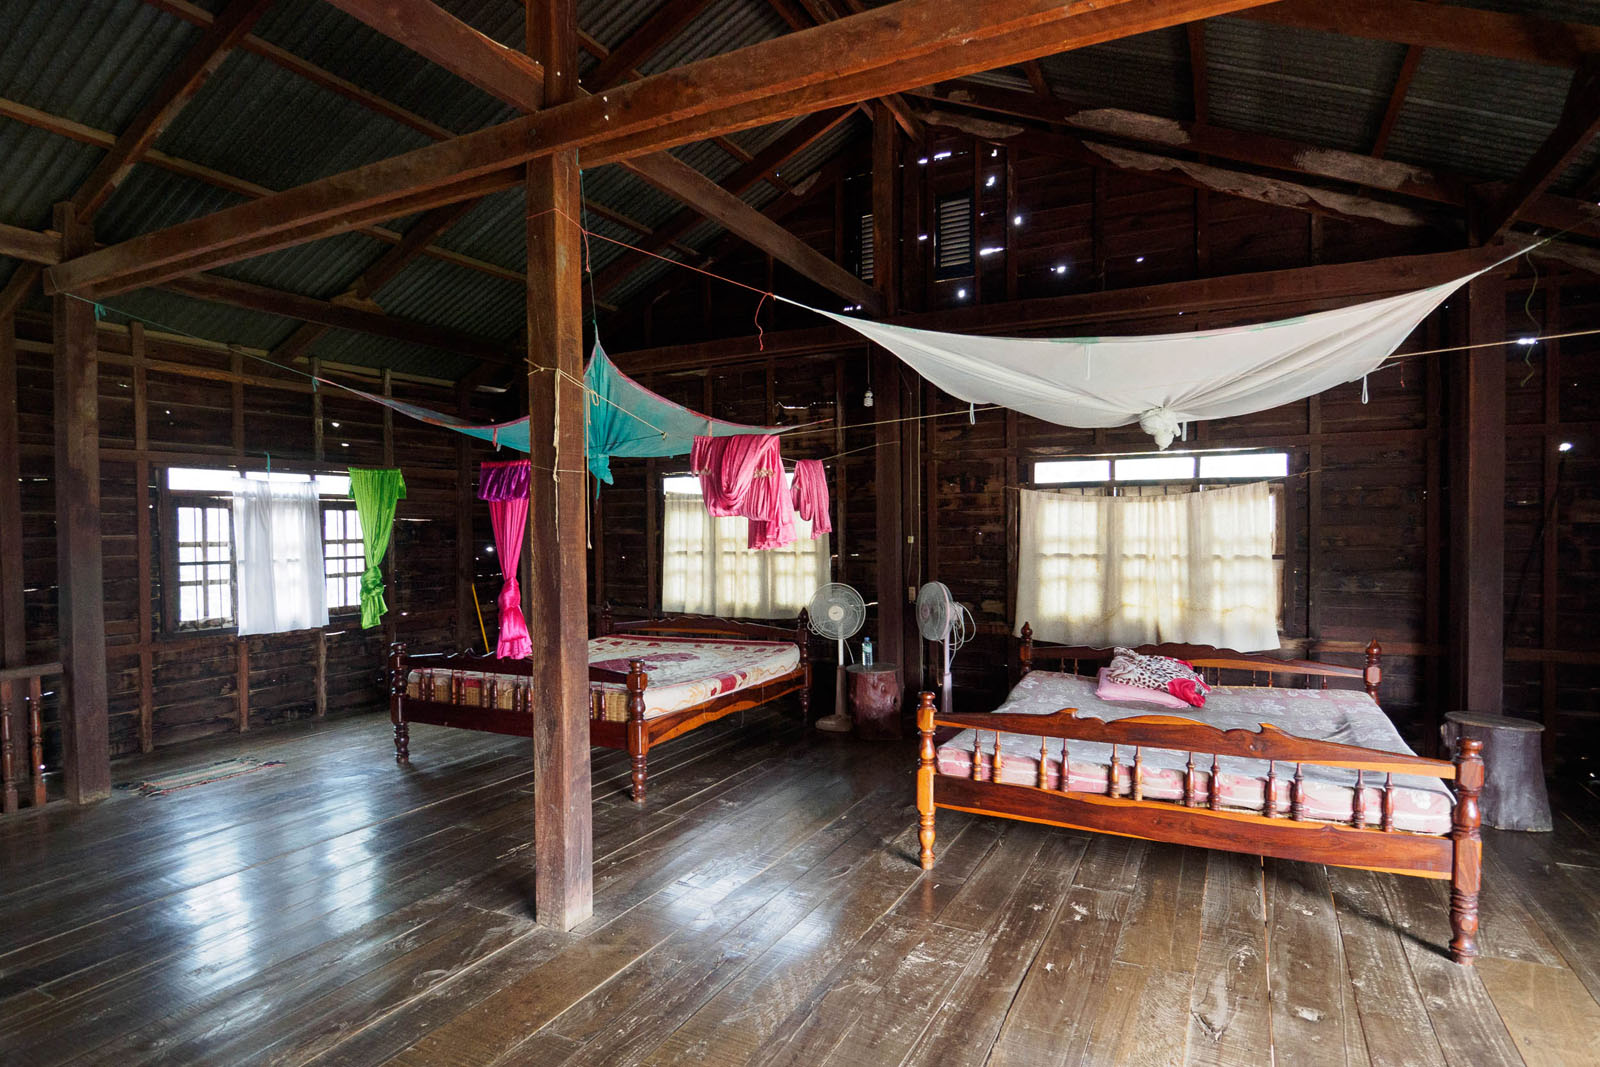 A typical bedroom at a homestay in Banteay Chhmar. Rooms are open, allowing a cool breeze to flow throughout the night. Photo by Emily Lush